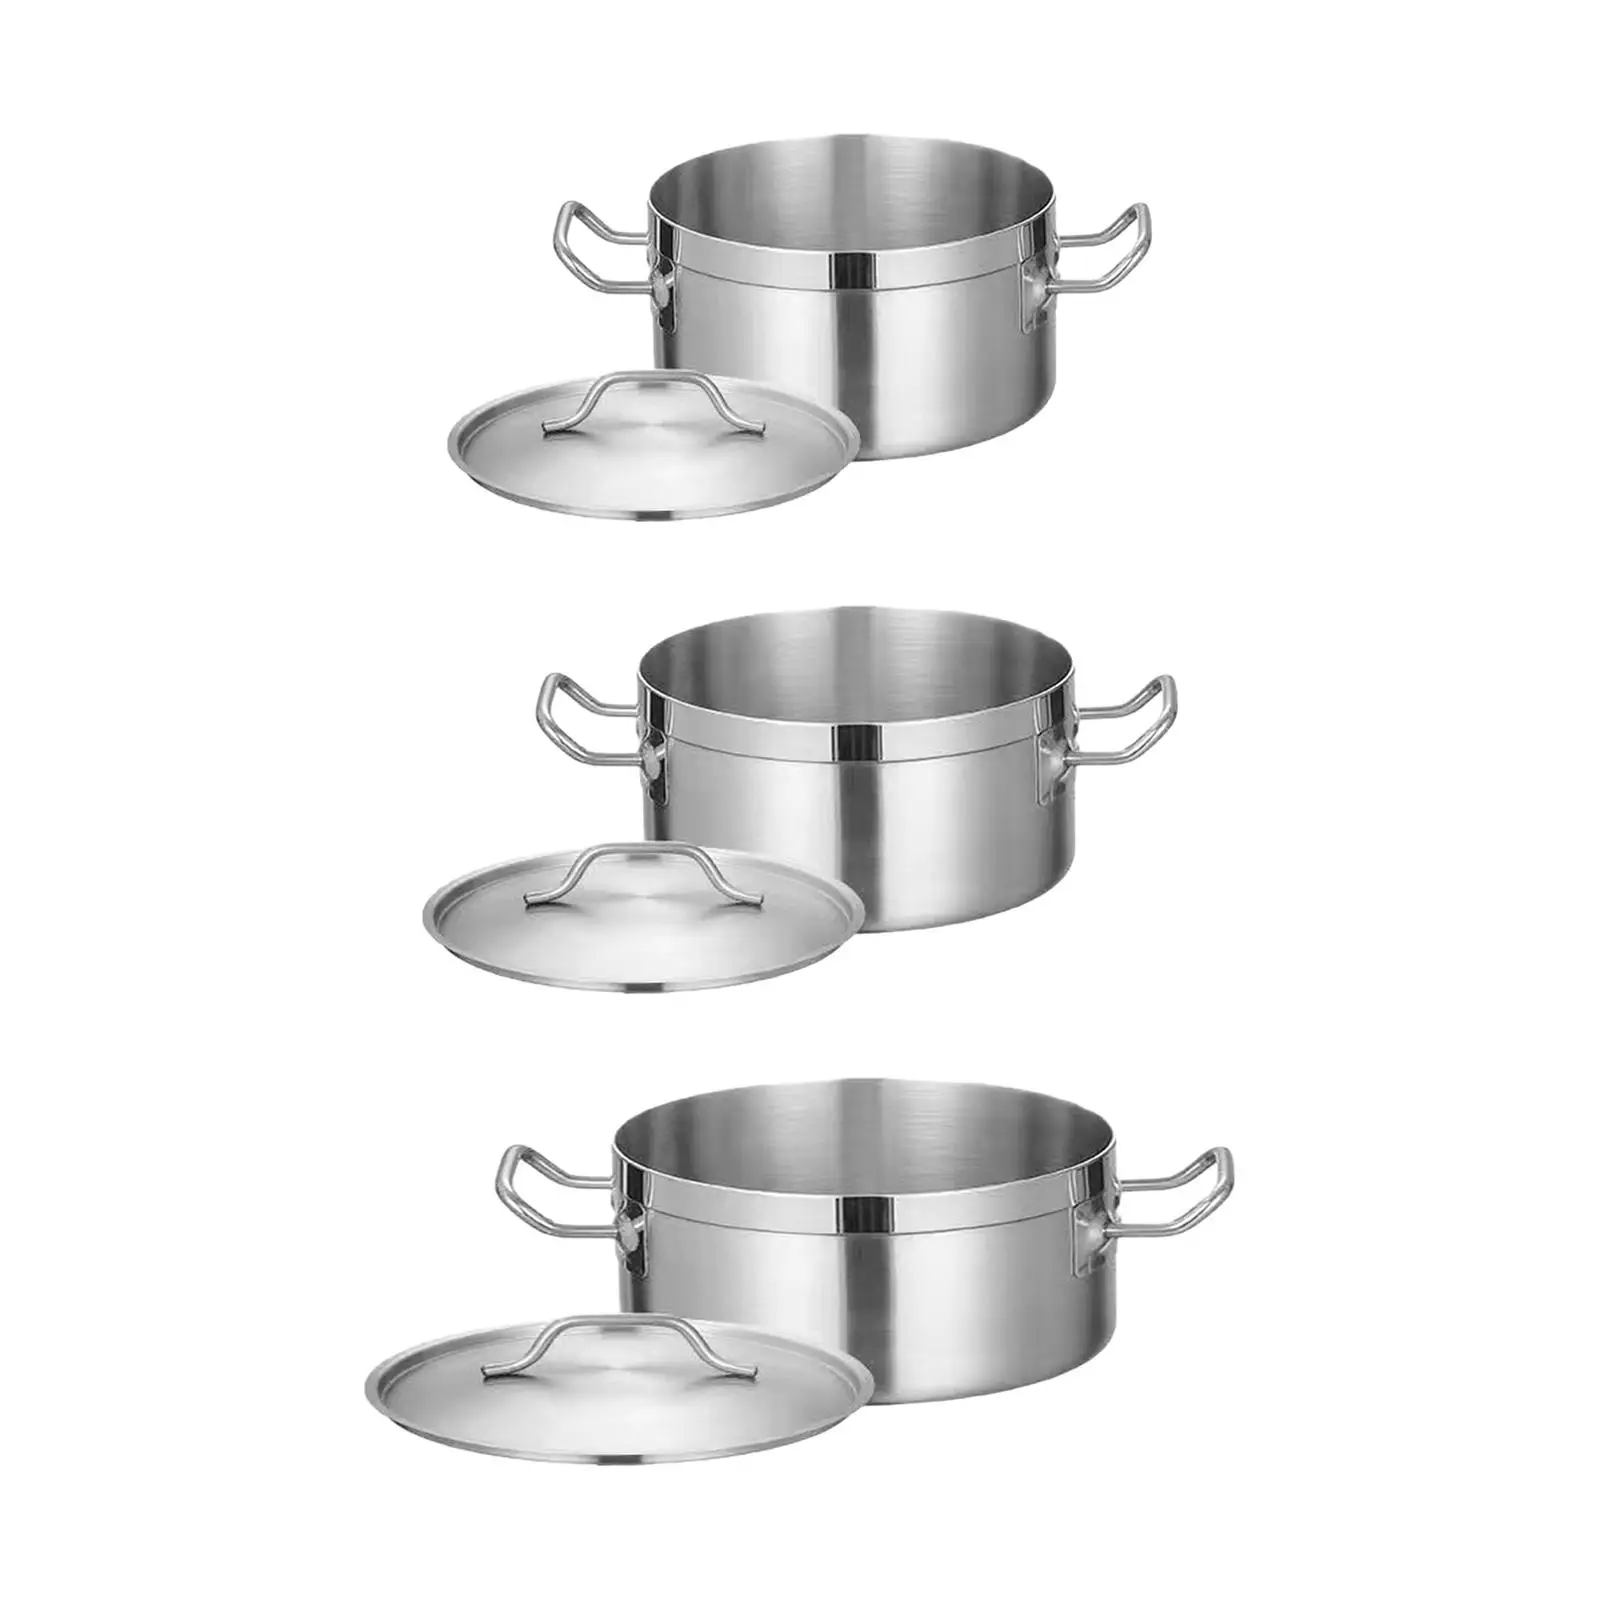 Stainless Steel Stockpot Induction Pot Small Stewing Pot Casserole Pot Cooking Pot Soup Pot for Household Kitchen Commercial